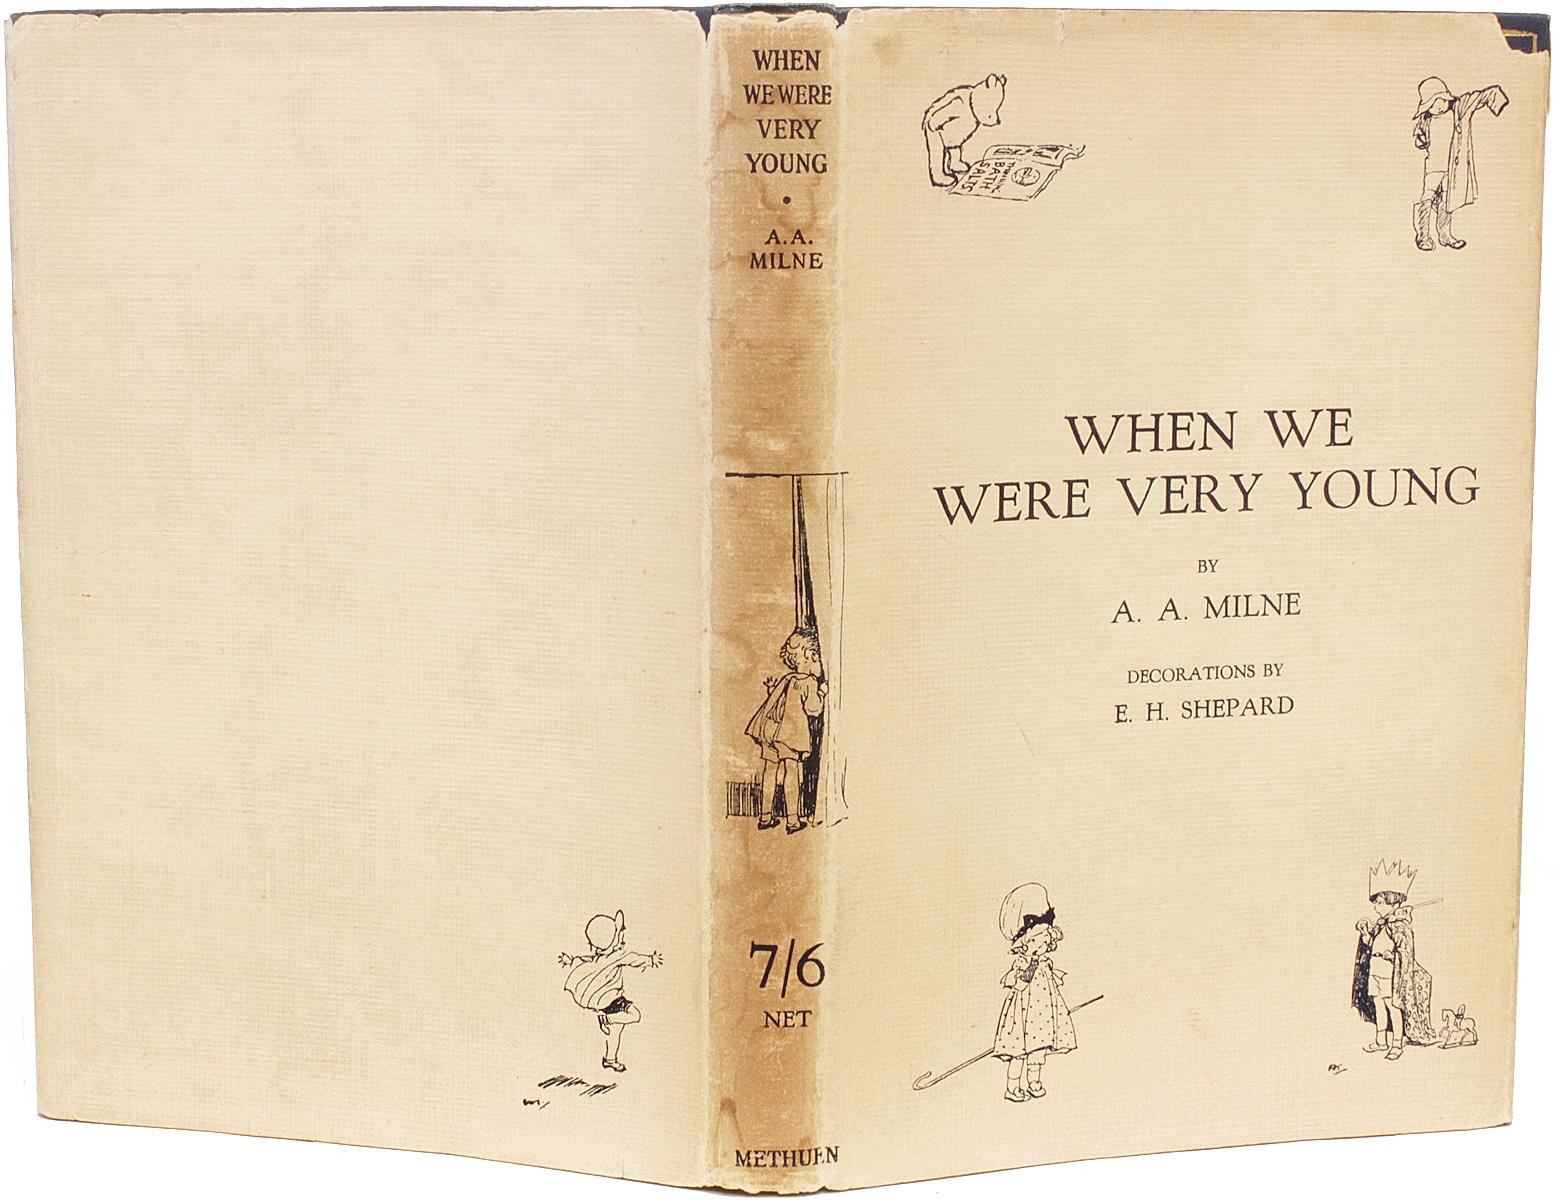 Author: MILNE, A. A.

Title: When We Were Very Young.

Publisher: London: Methuen & Co. Ltd., 1924.

FIRST EDITION. 1 volume, second state of page 9 (no priority), blank pastedowns and endpapers, illustrated by E. H. Shepard, with the original